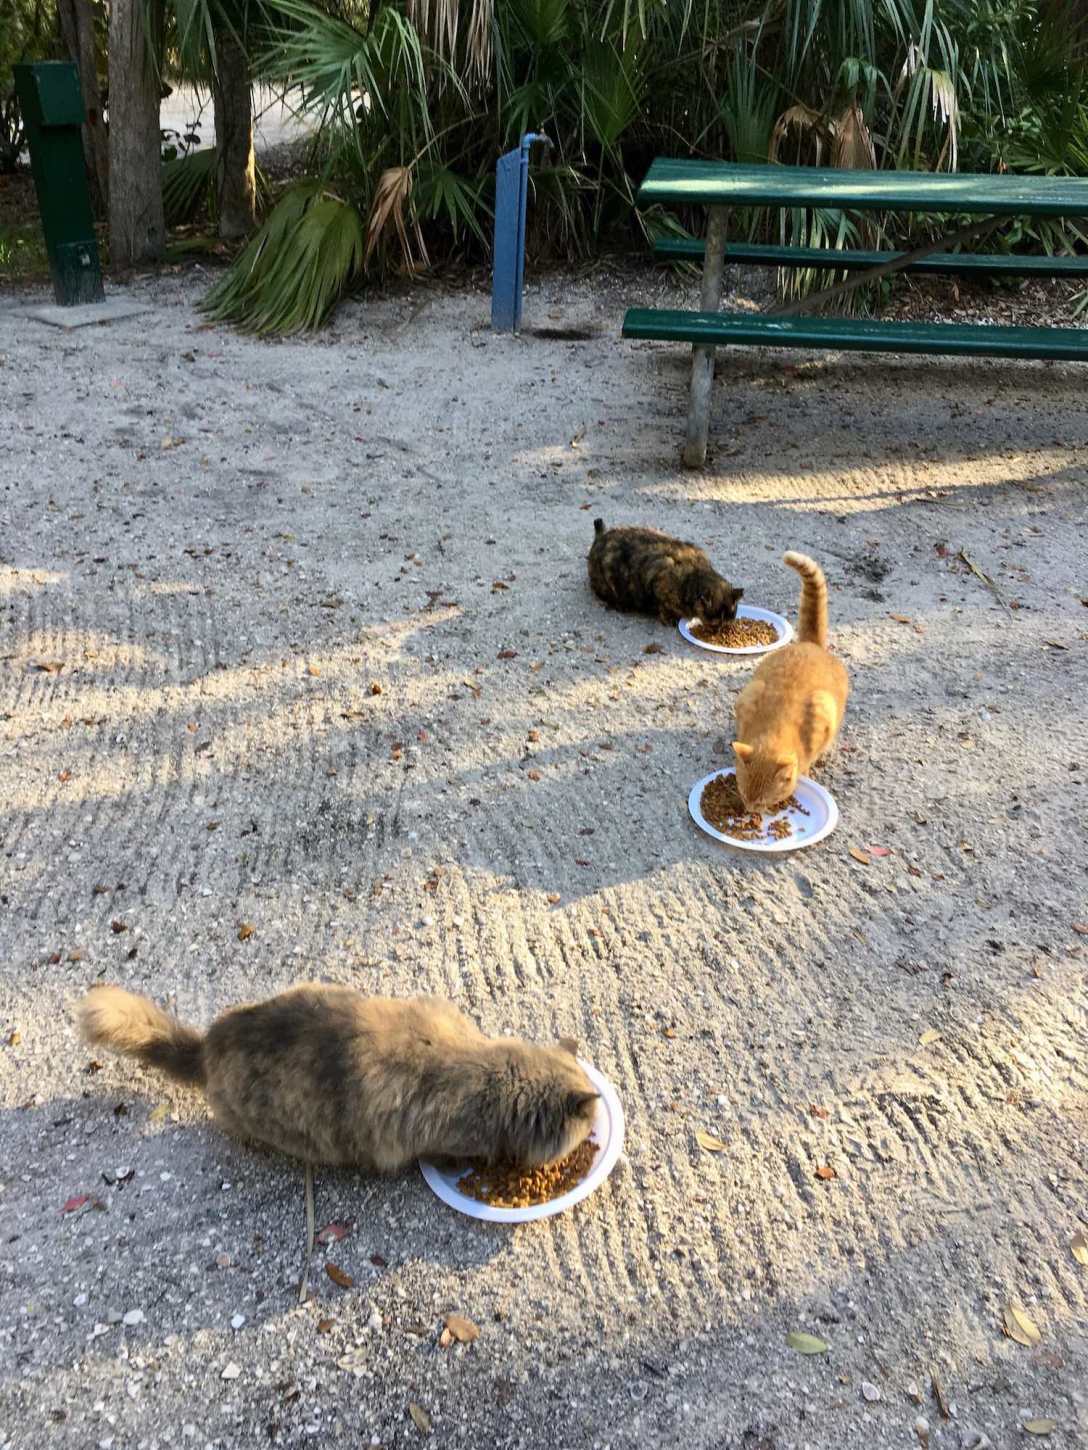 Feral cats at Fort De Soto Park campground near St. Petersburg, Florida